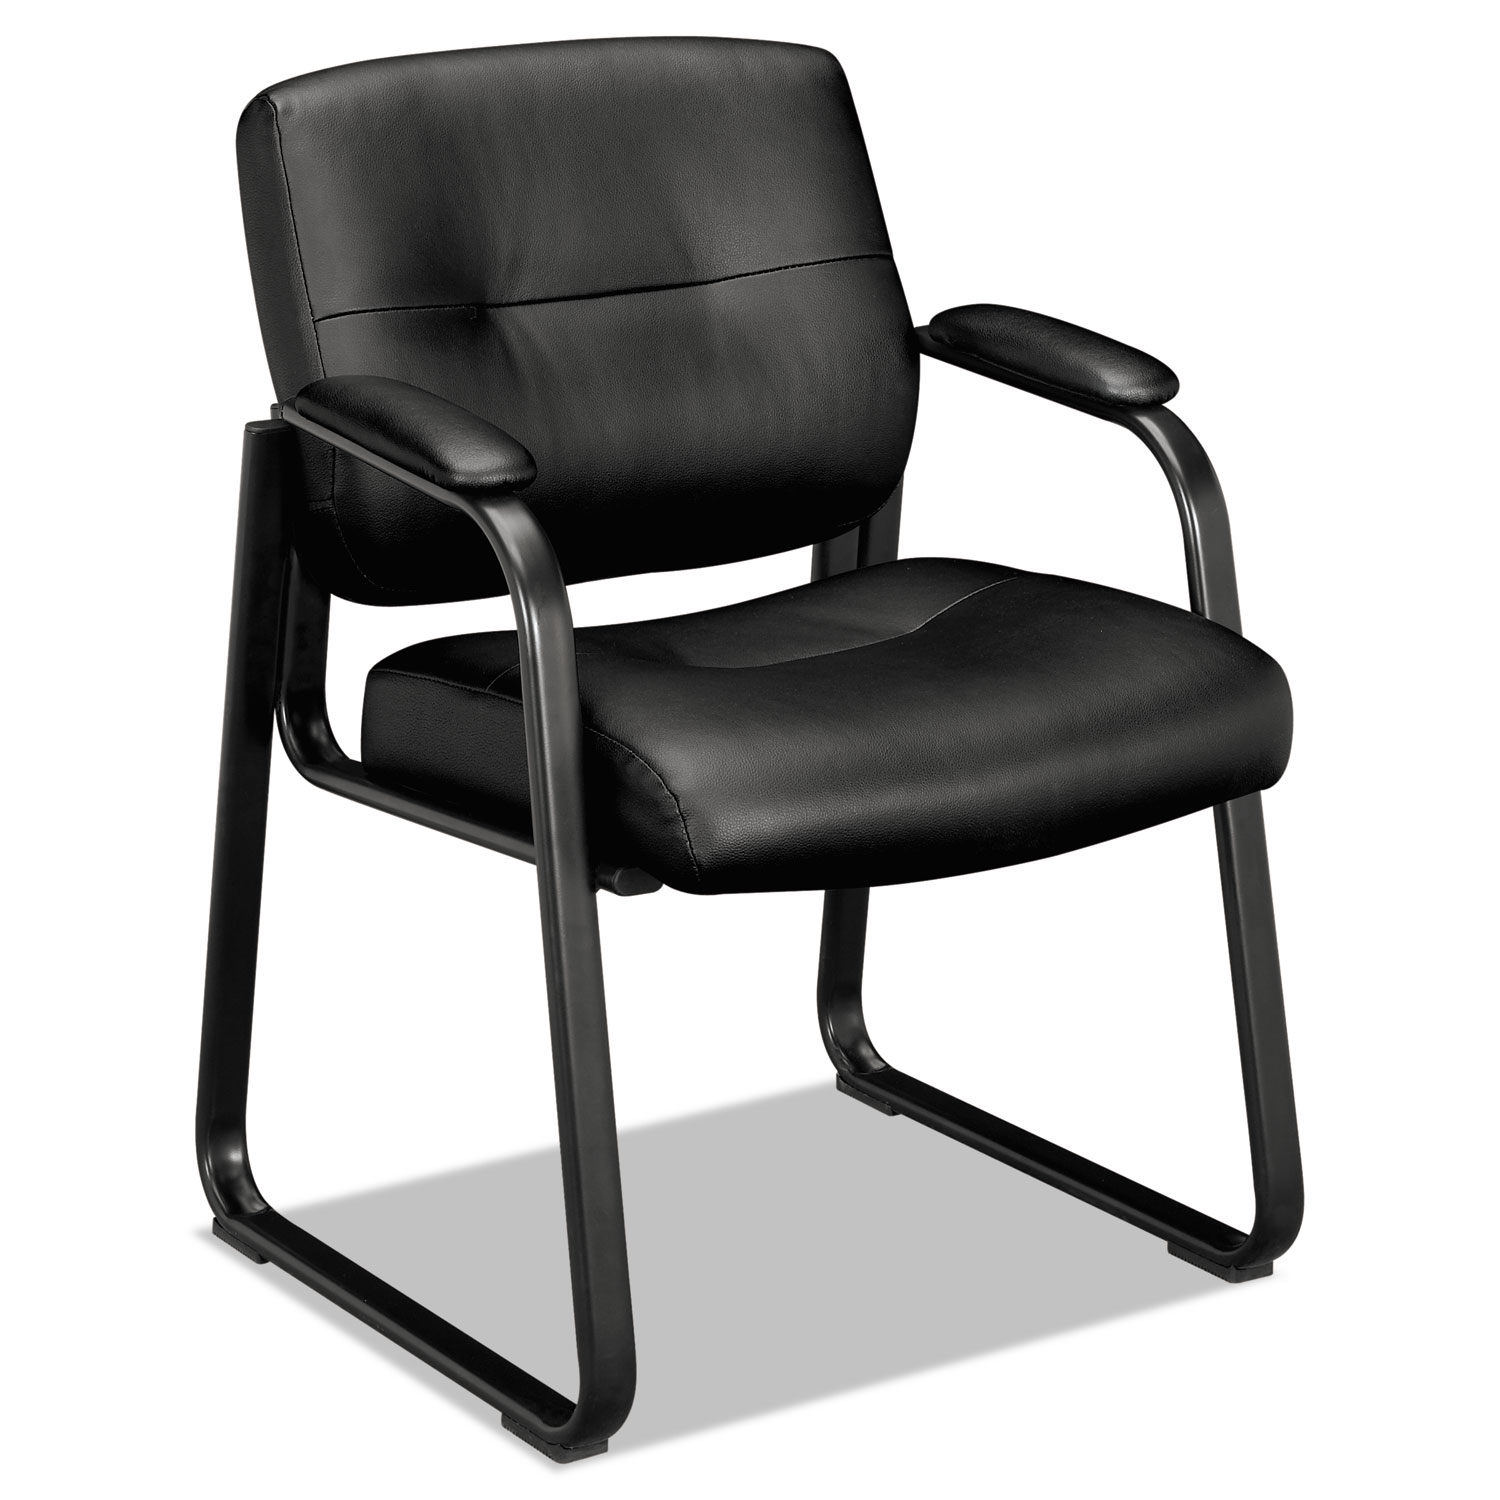 VL690 Series Guest Leather Chair, Black Leather